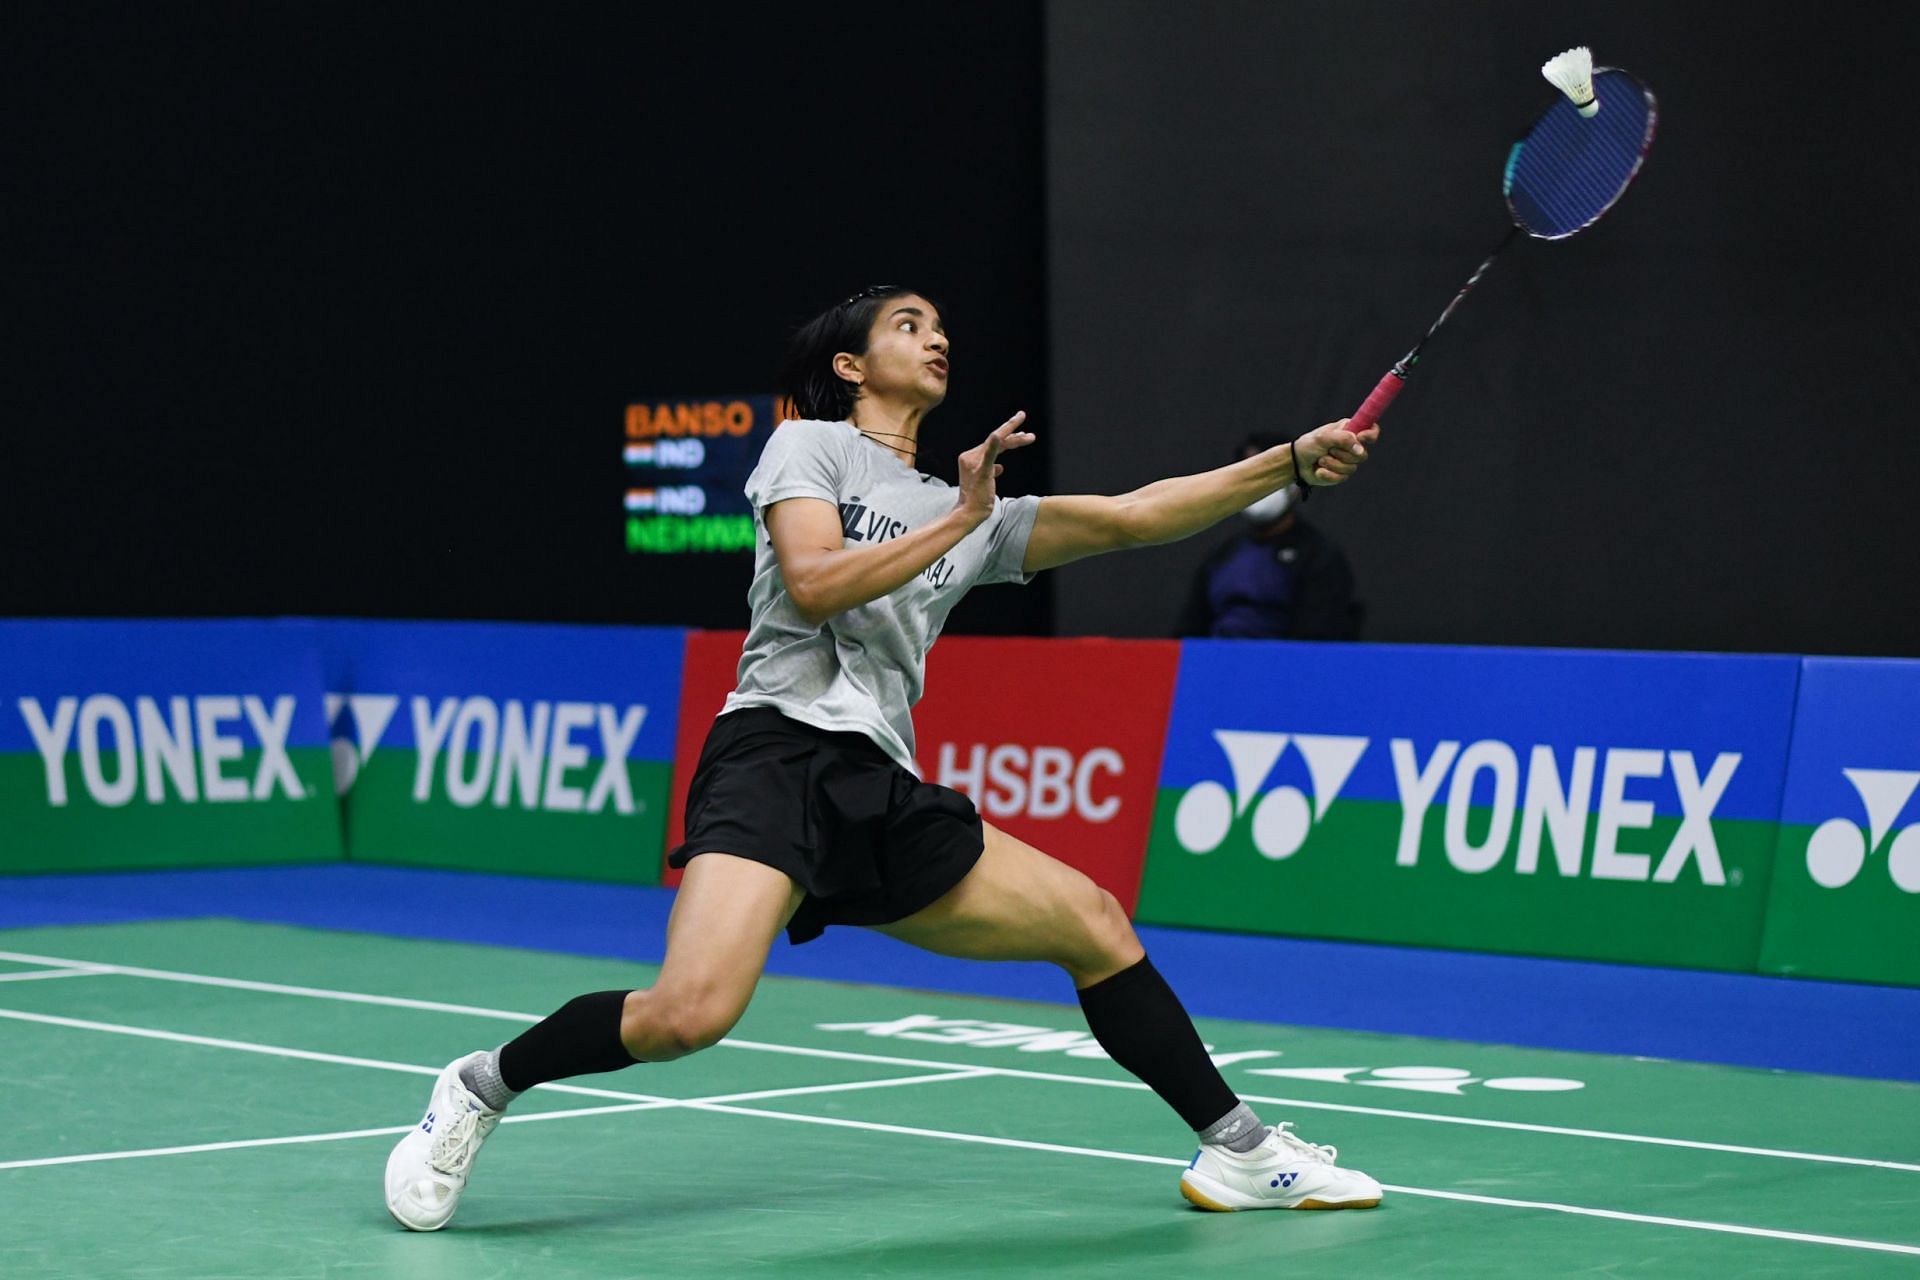 India&#039;s Malvika Bansod lost to Michelle Li of Canada 18-21, 22-20, 9-21 in the German Open first round. (Pic credit: BAI)